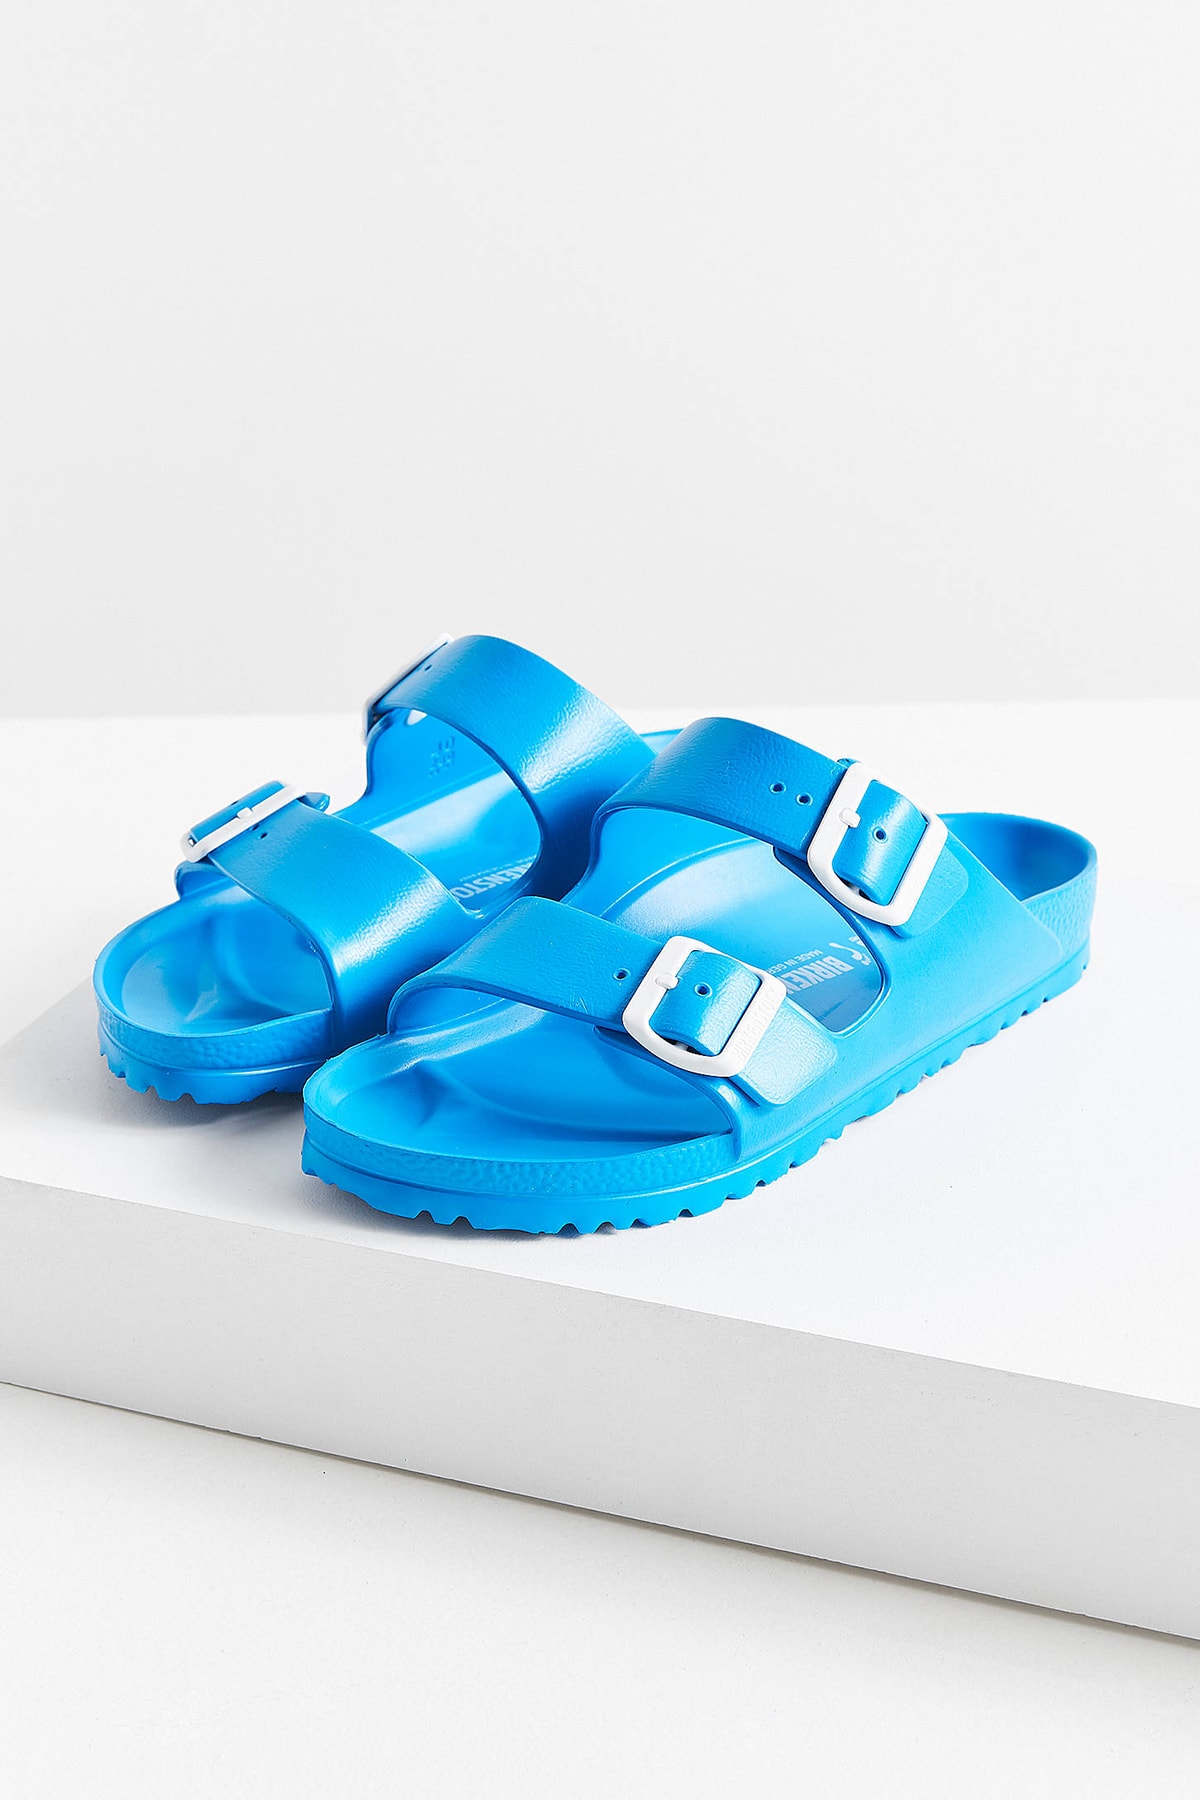 Birkenstock Arizona EVA Sandals Blue Urban Outfitters Price Release Slip Ons Slippers Where to Buy